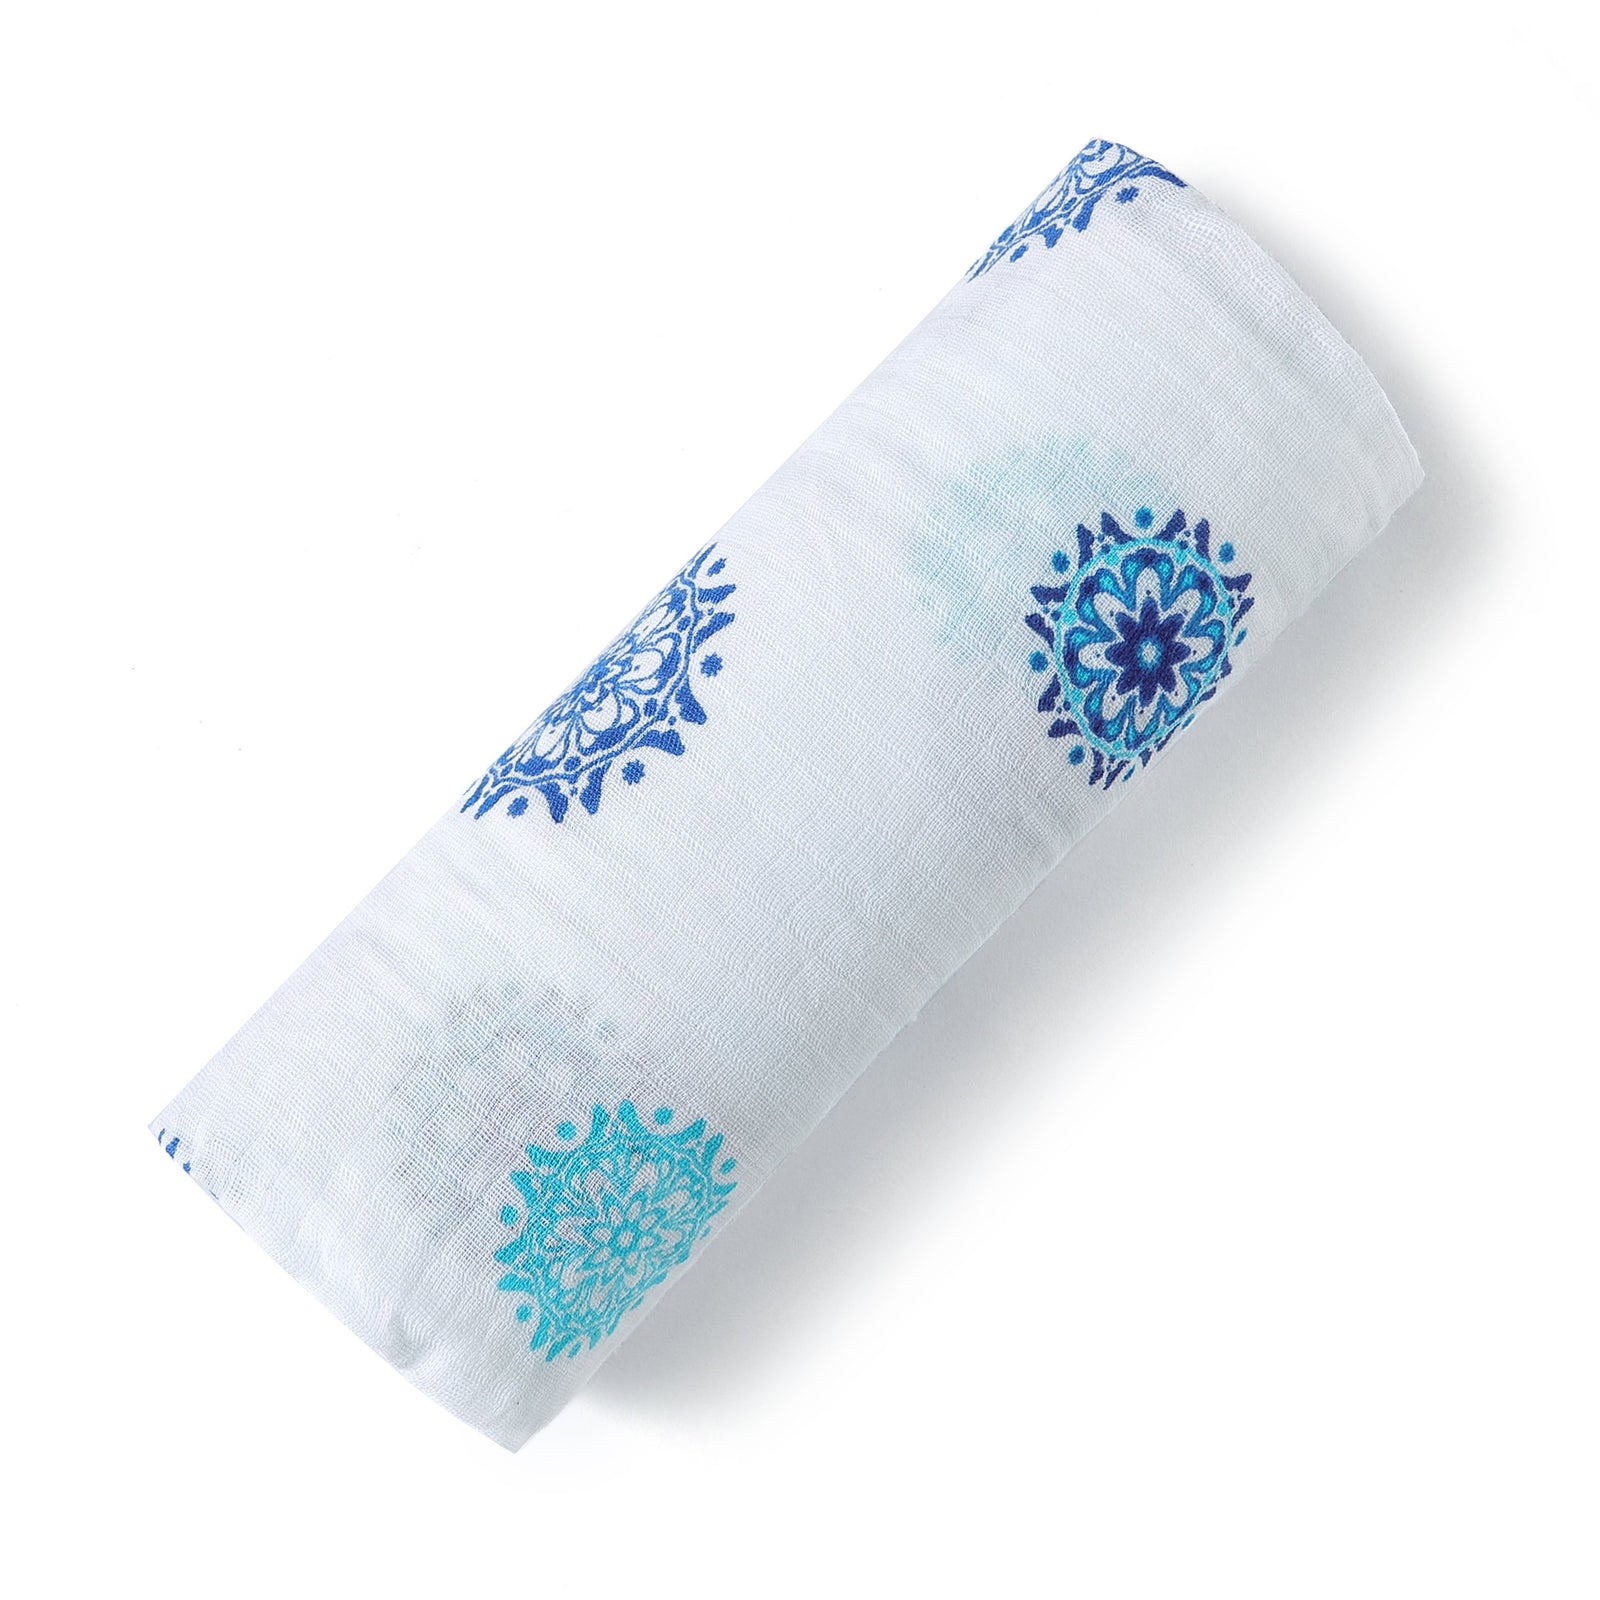 Mandala Soft Organic Cotton Swaddle for Home or On the Go